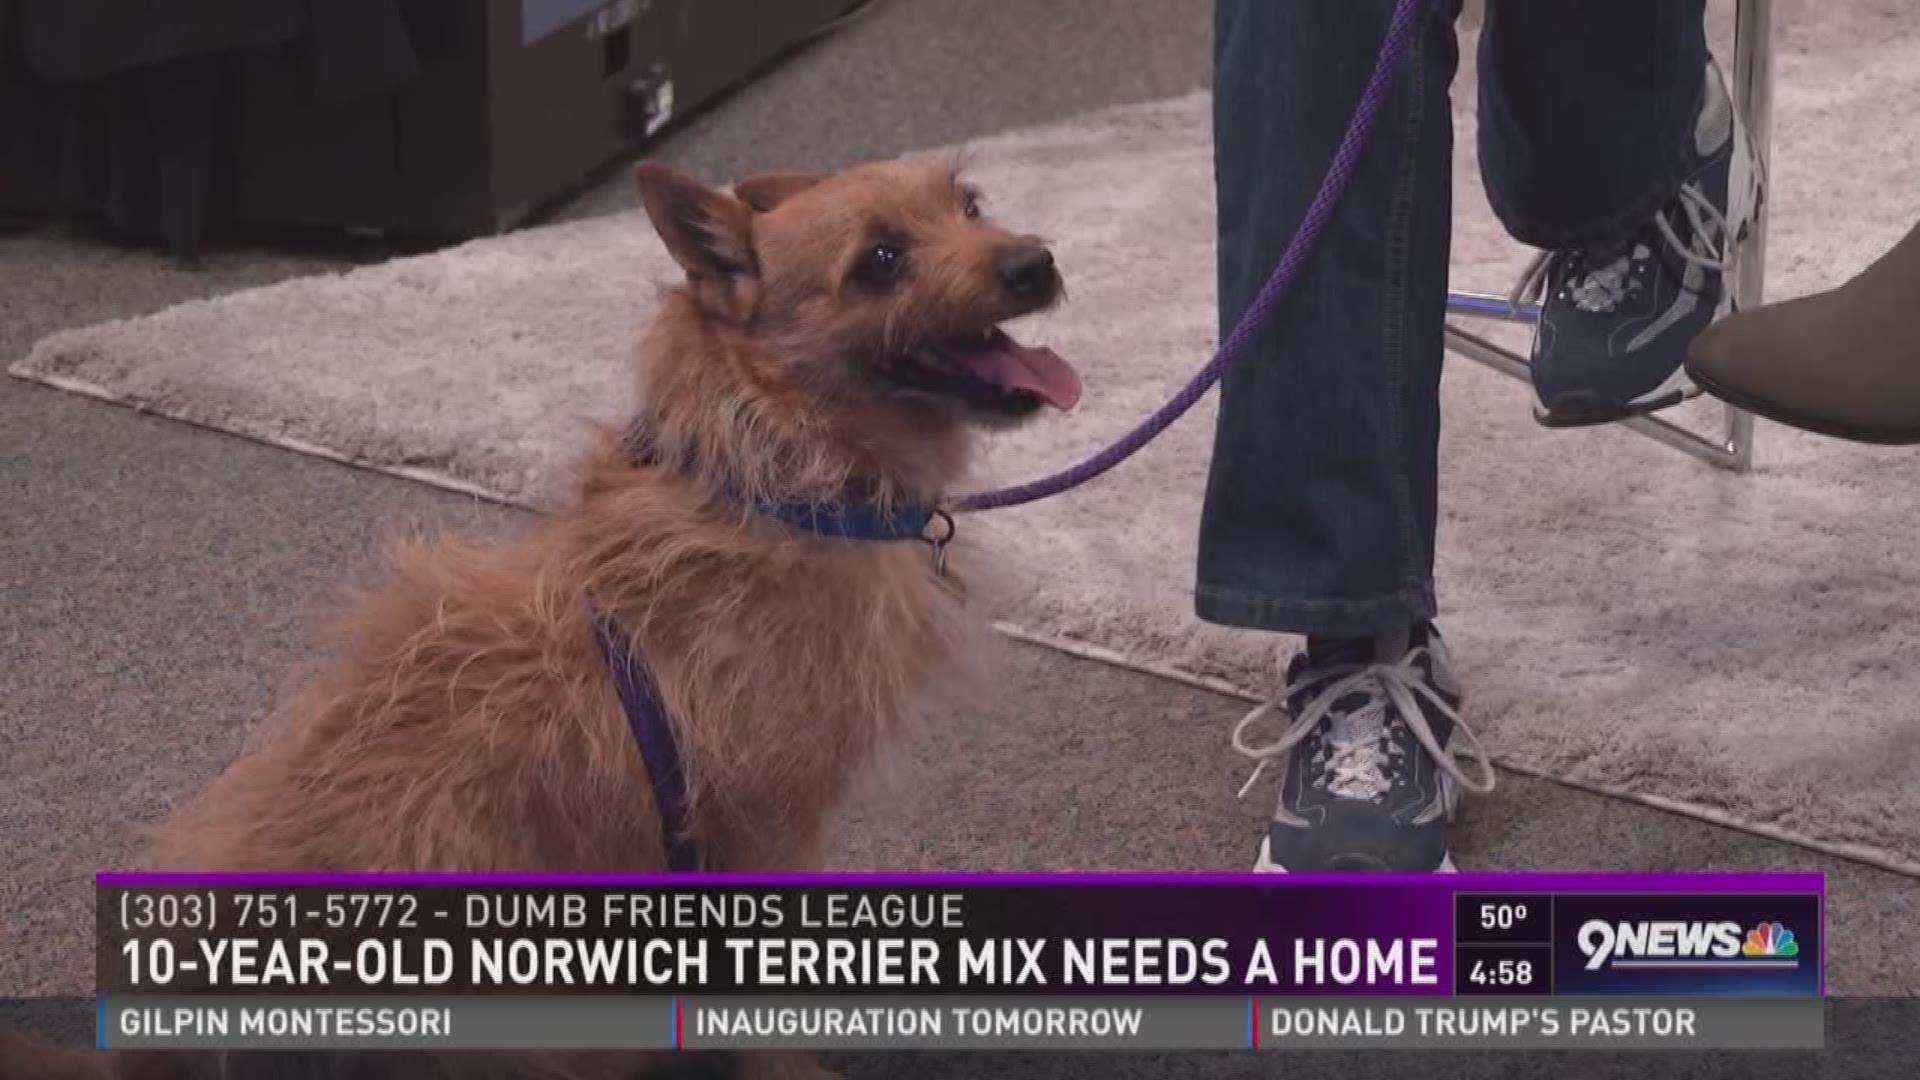 10-year-old Norwich terrier mix needs a home | 9news.com